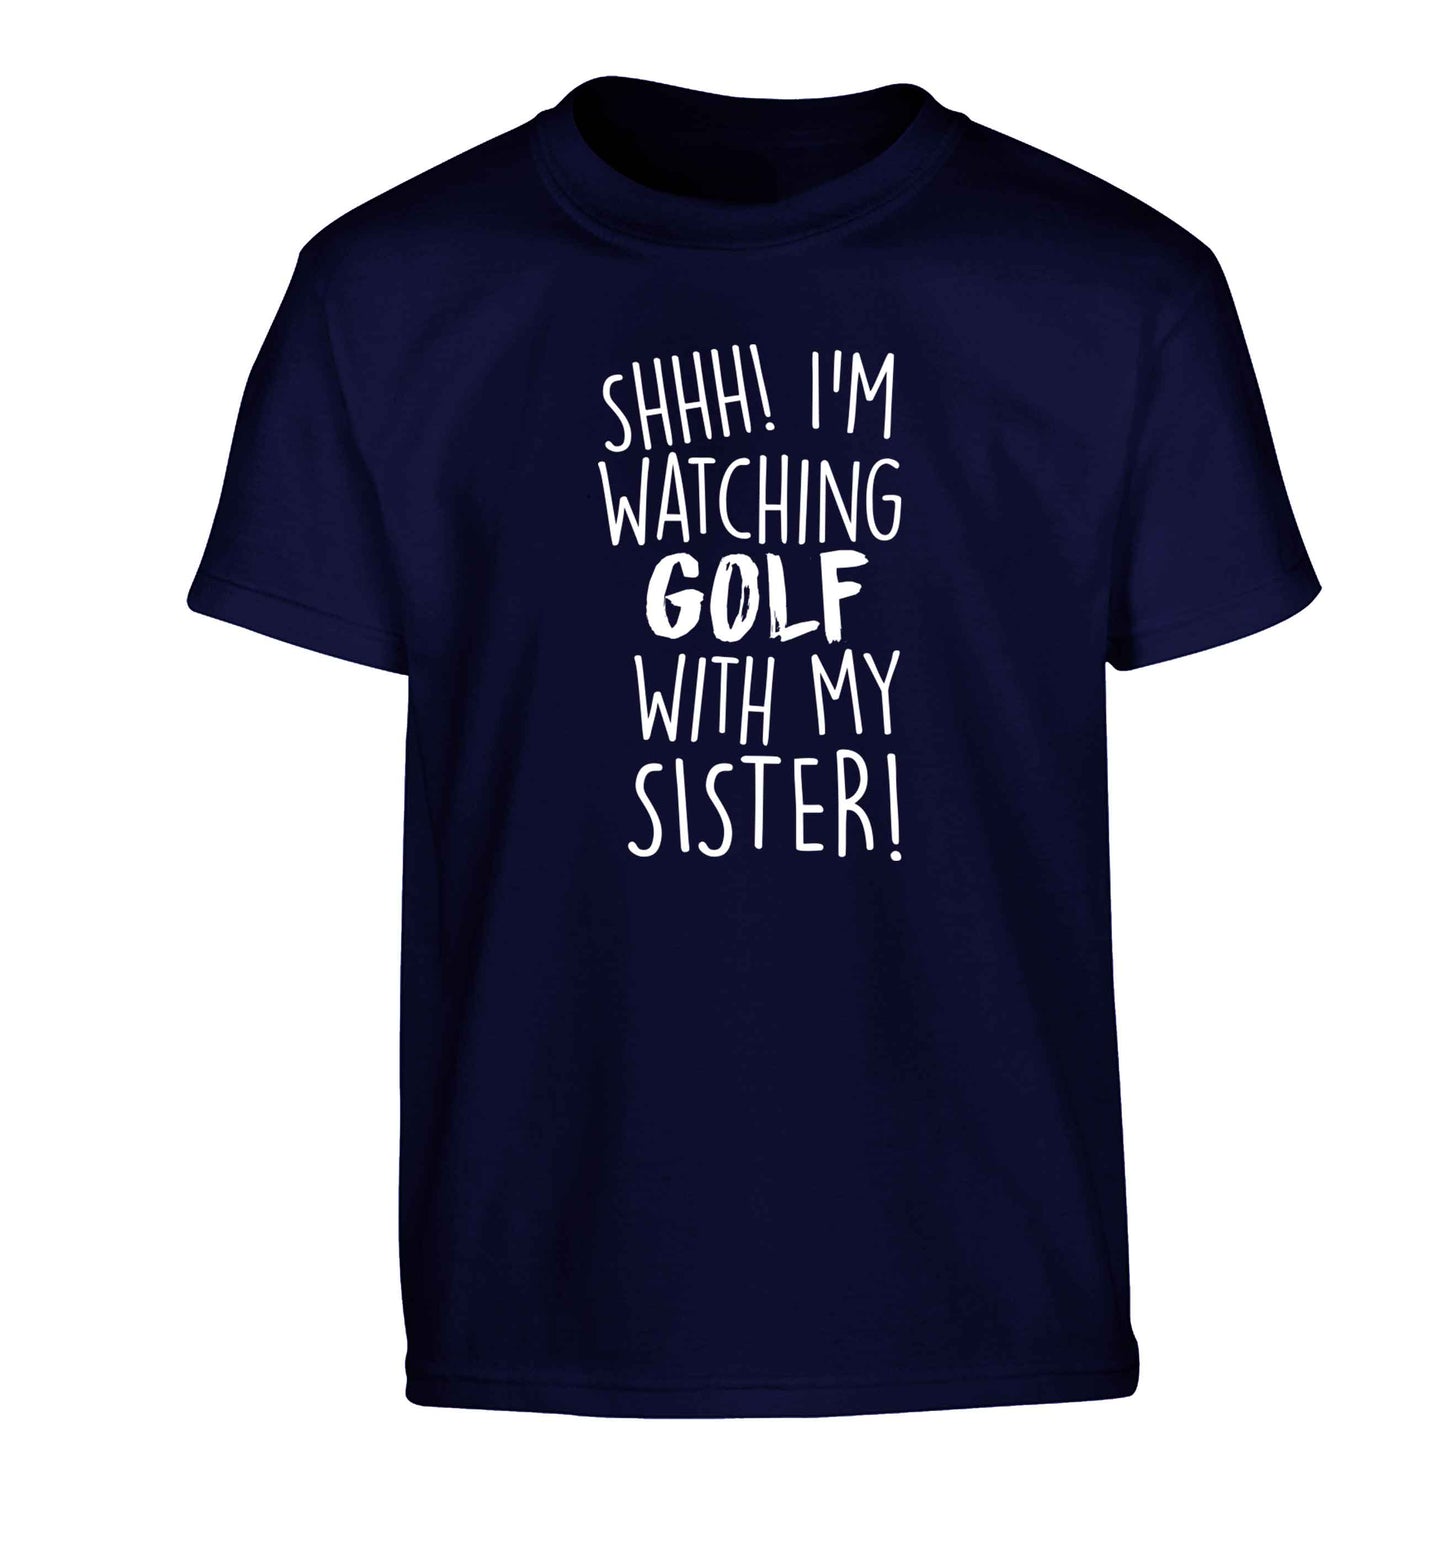 Shh I'm watching golf with my sister Children's navy Tshirt 12-13 Years